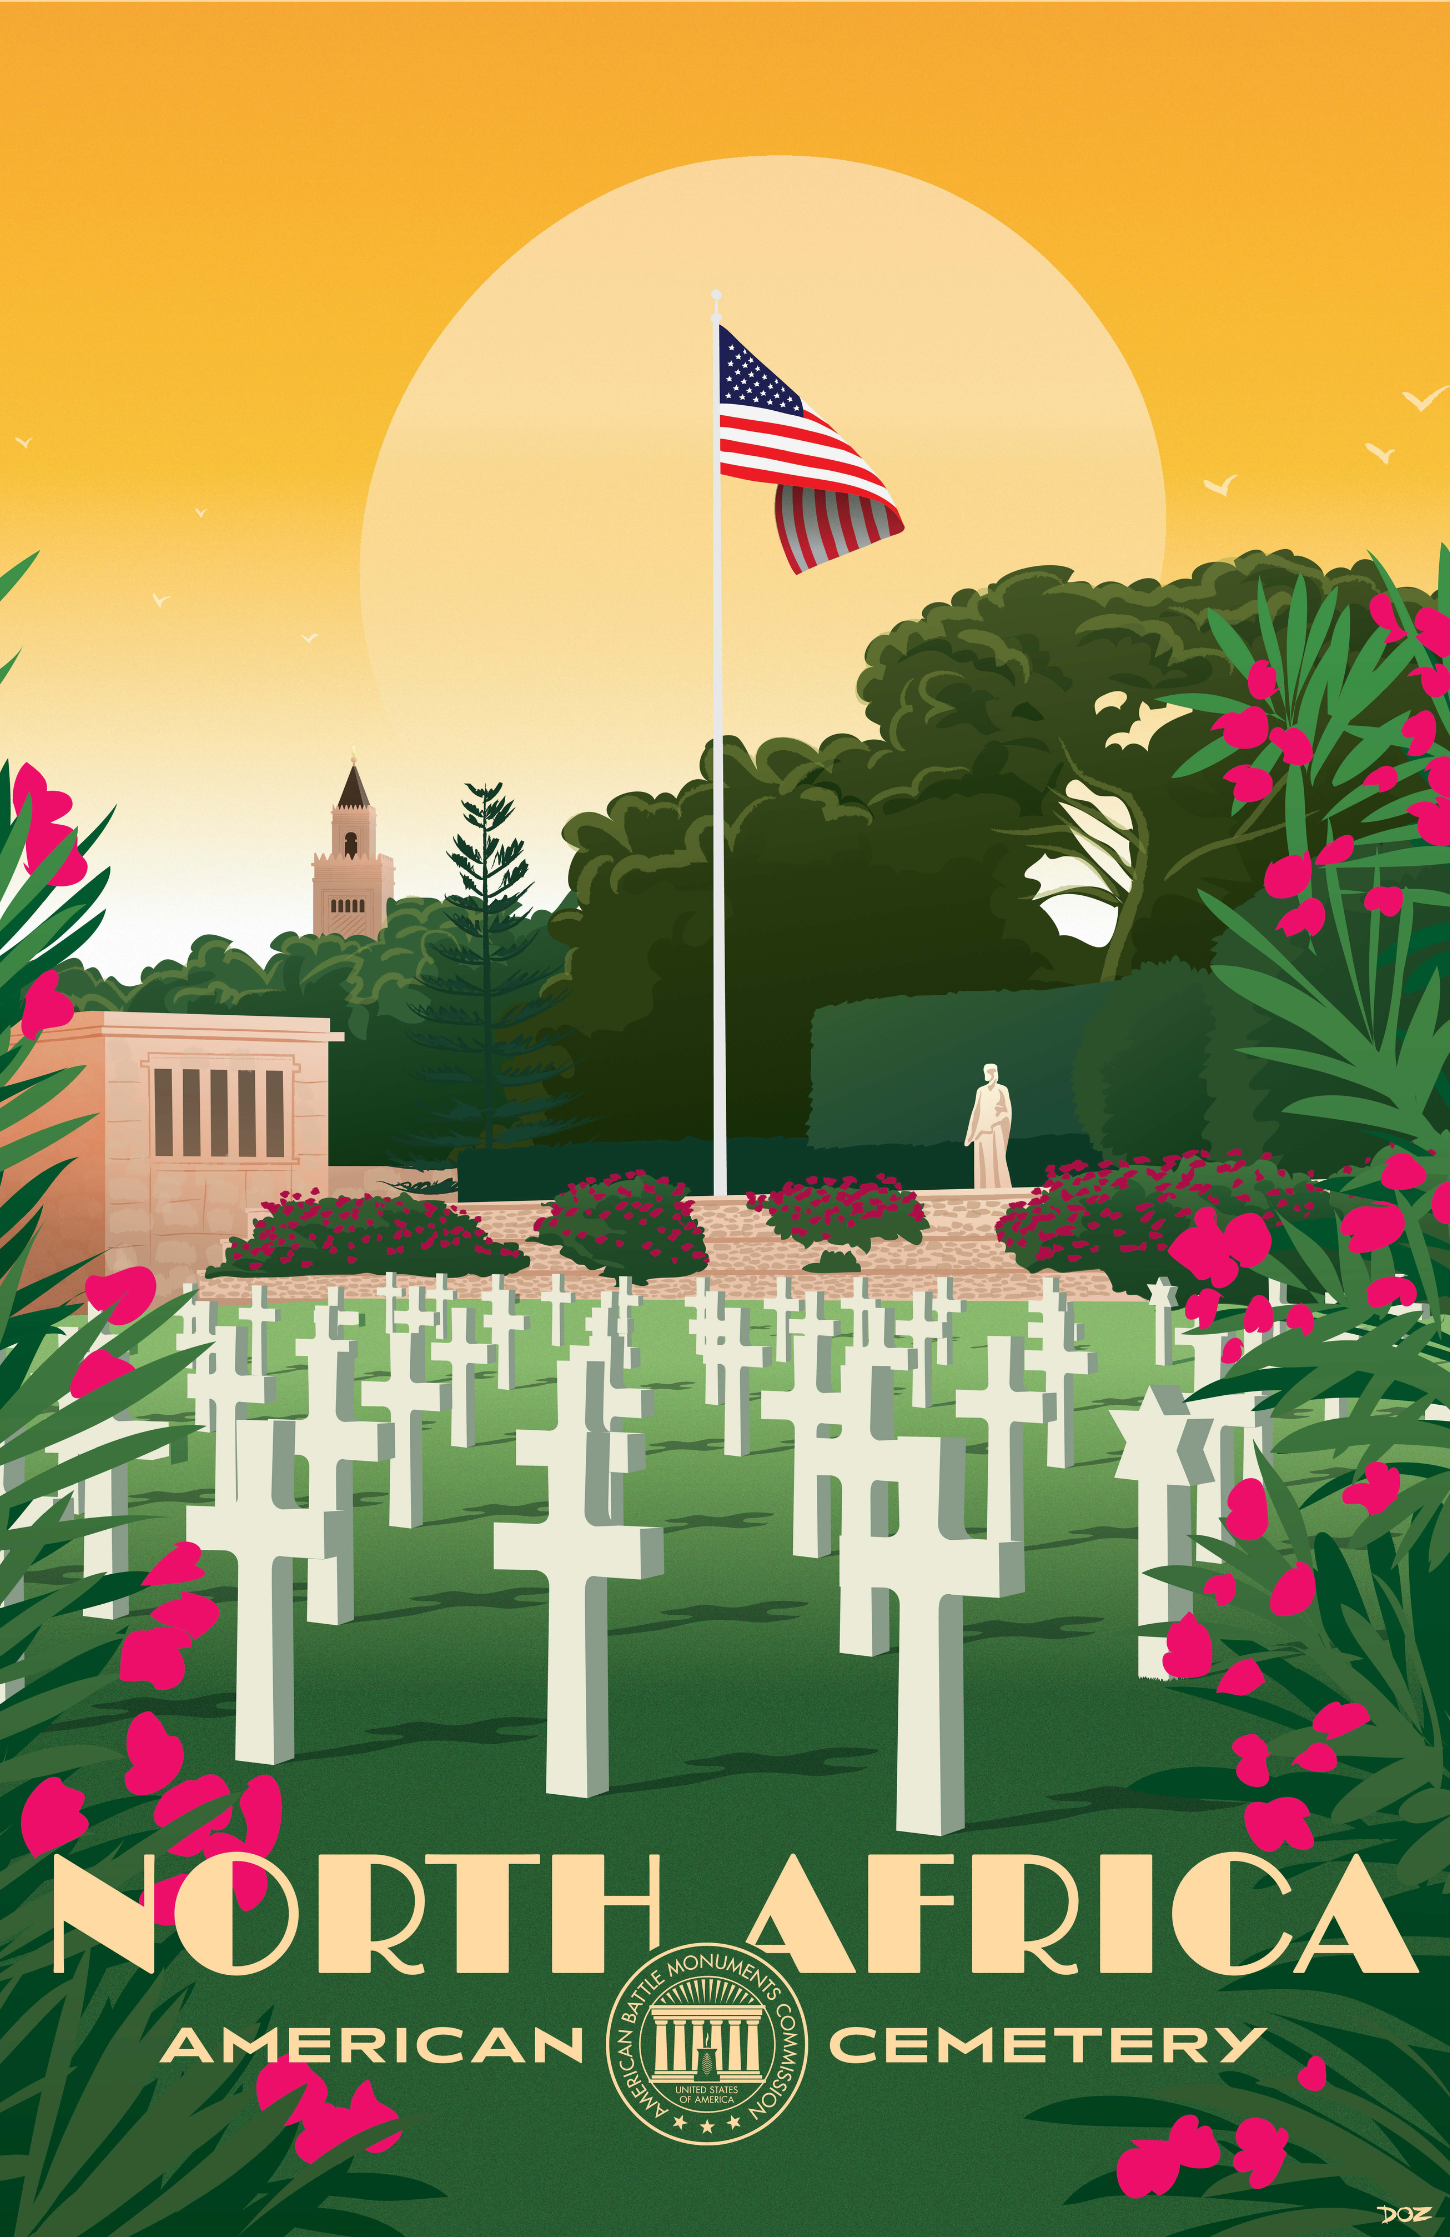 Vintage poster of North Africa American Cemetery created to mark ABMC Centennial